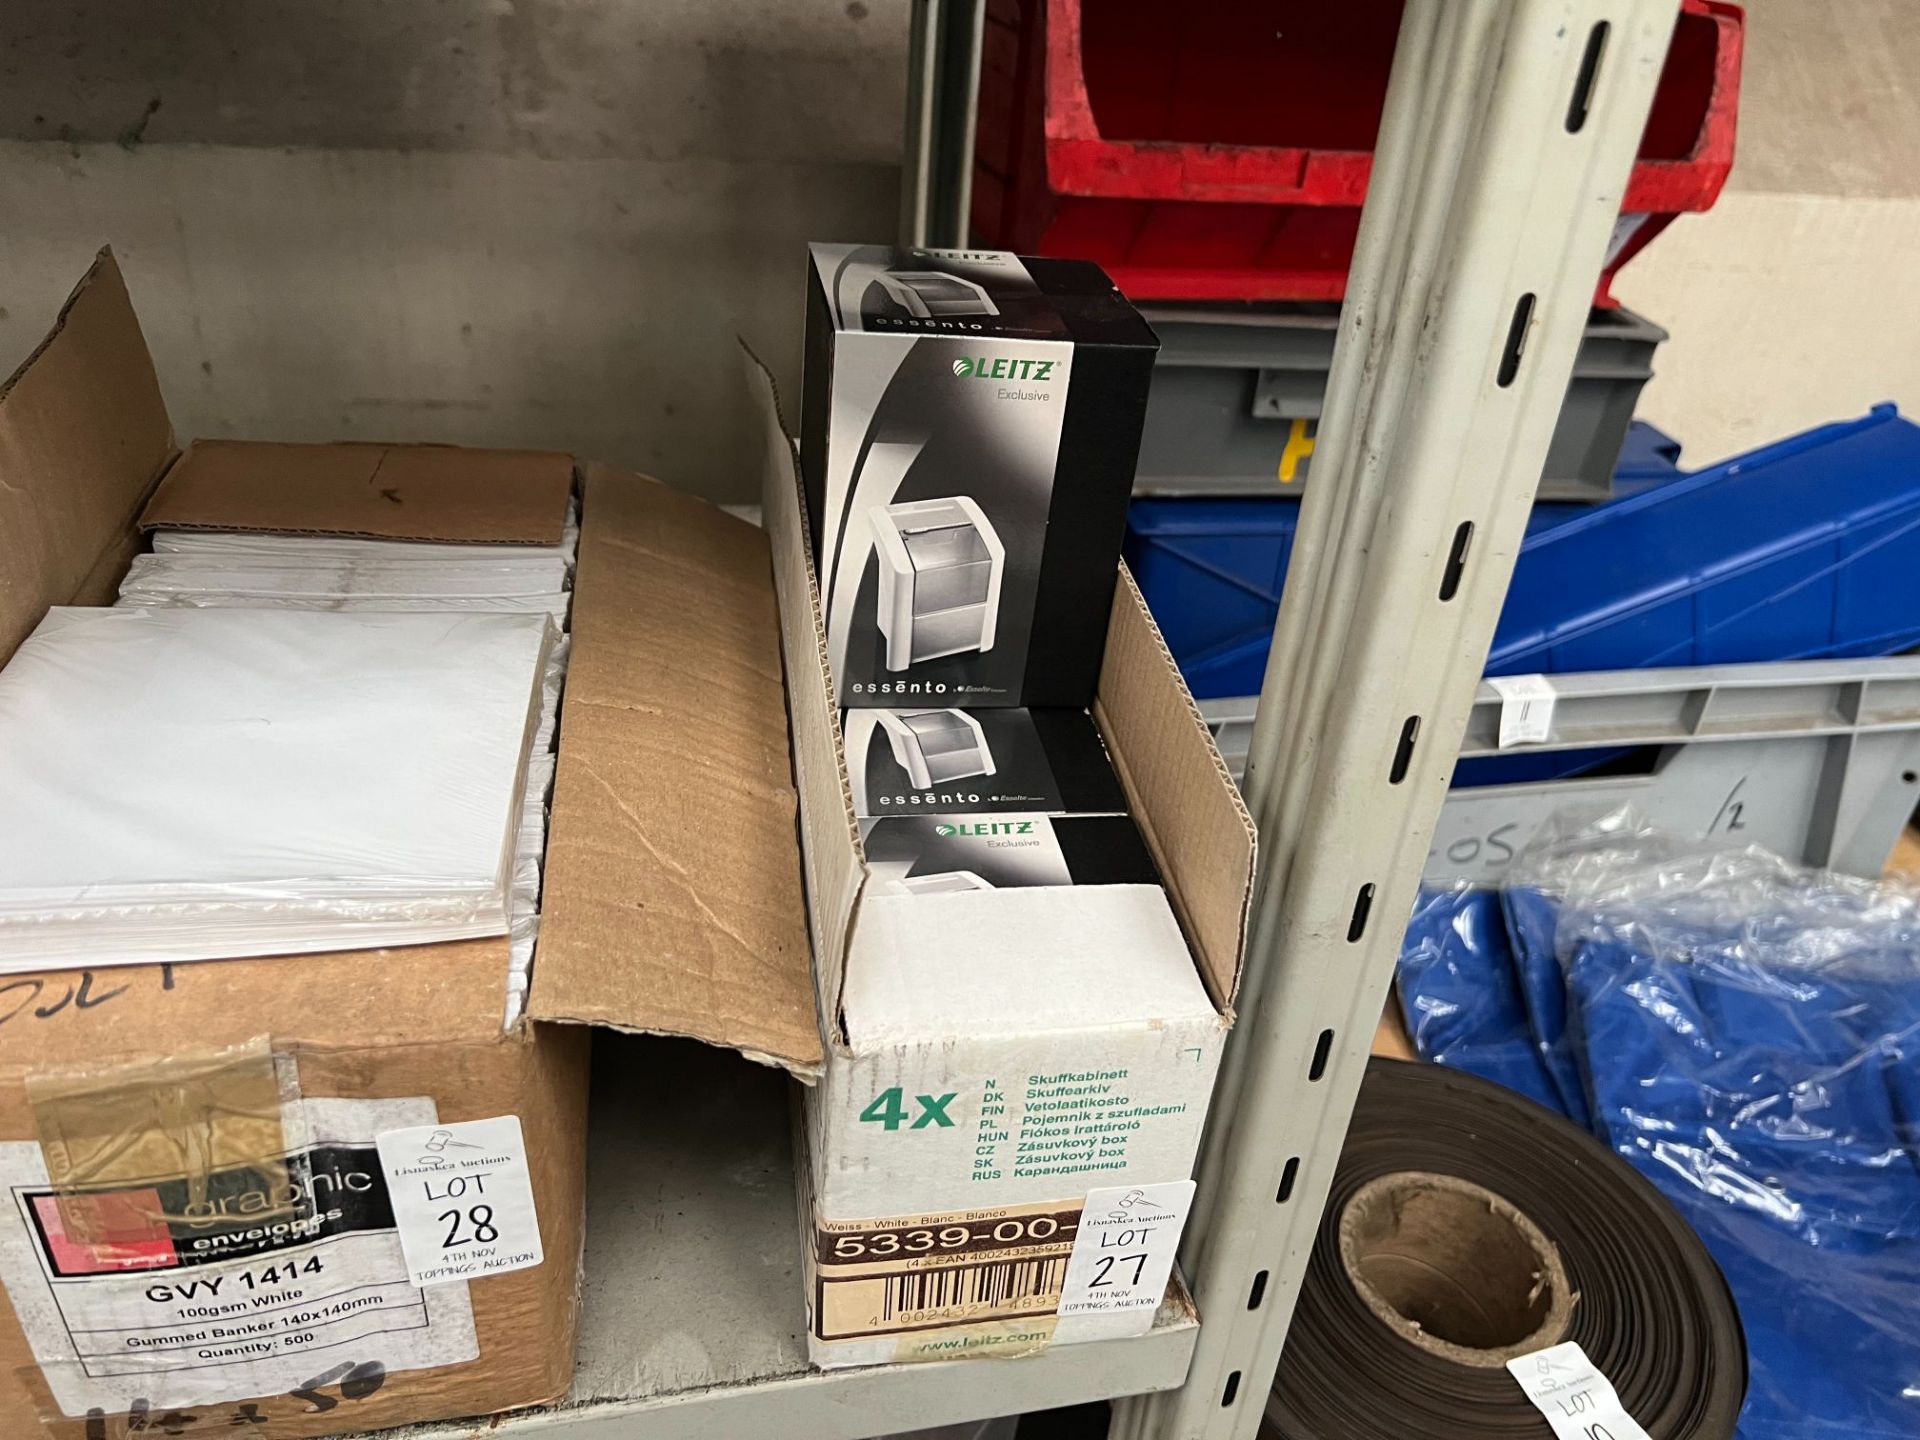 BOX OF OFFICE ITEMS (NEW)